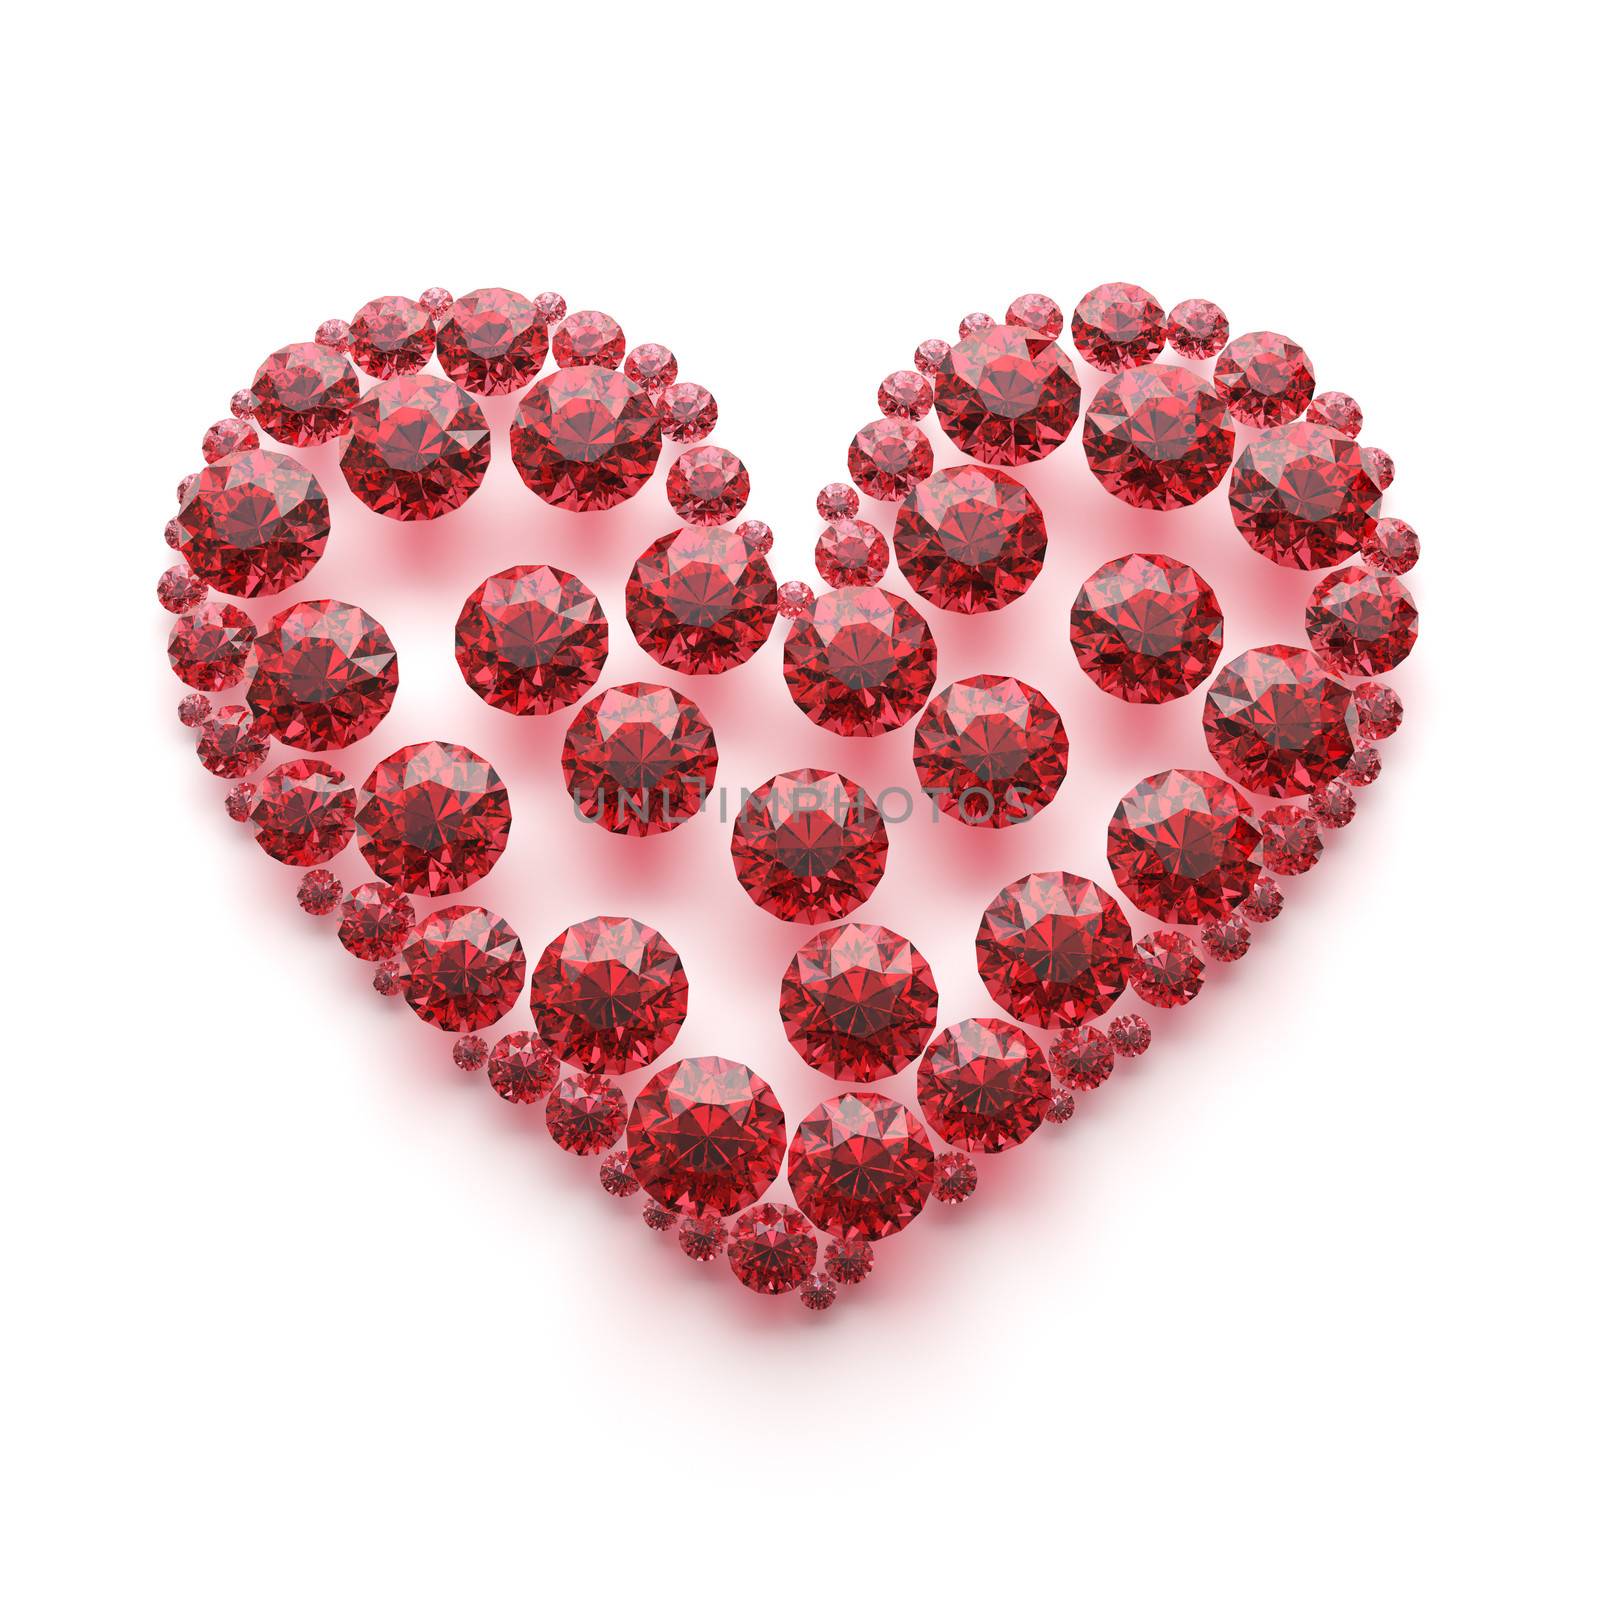 Red diamond heart - isolated with clipping path by 123dartist